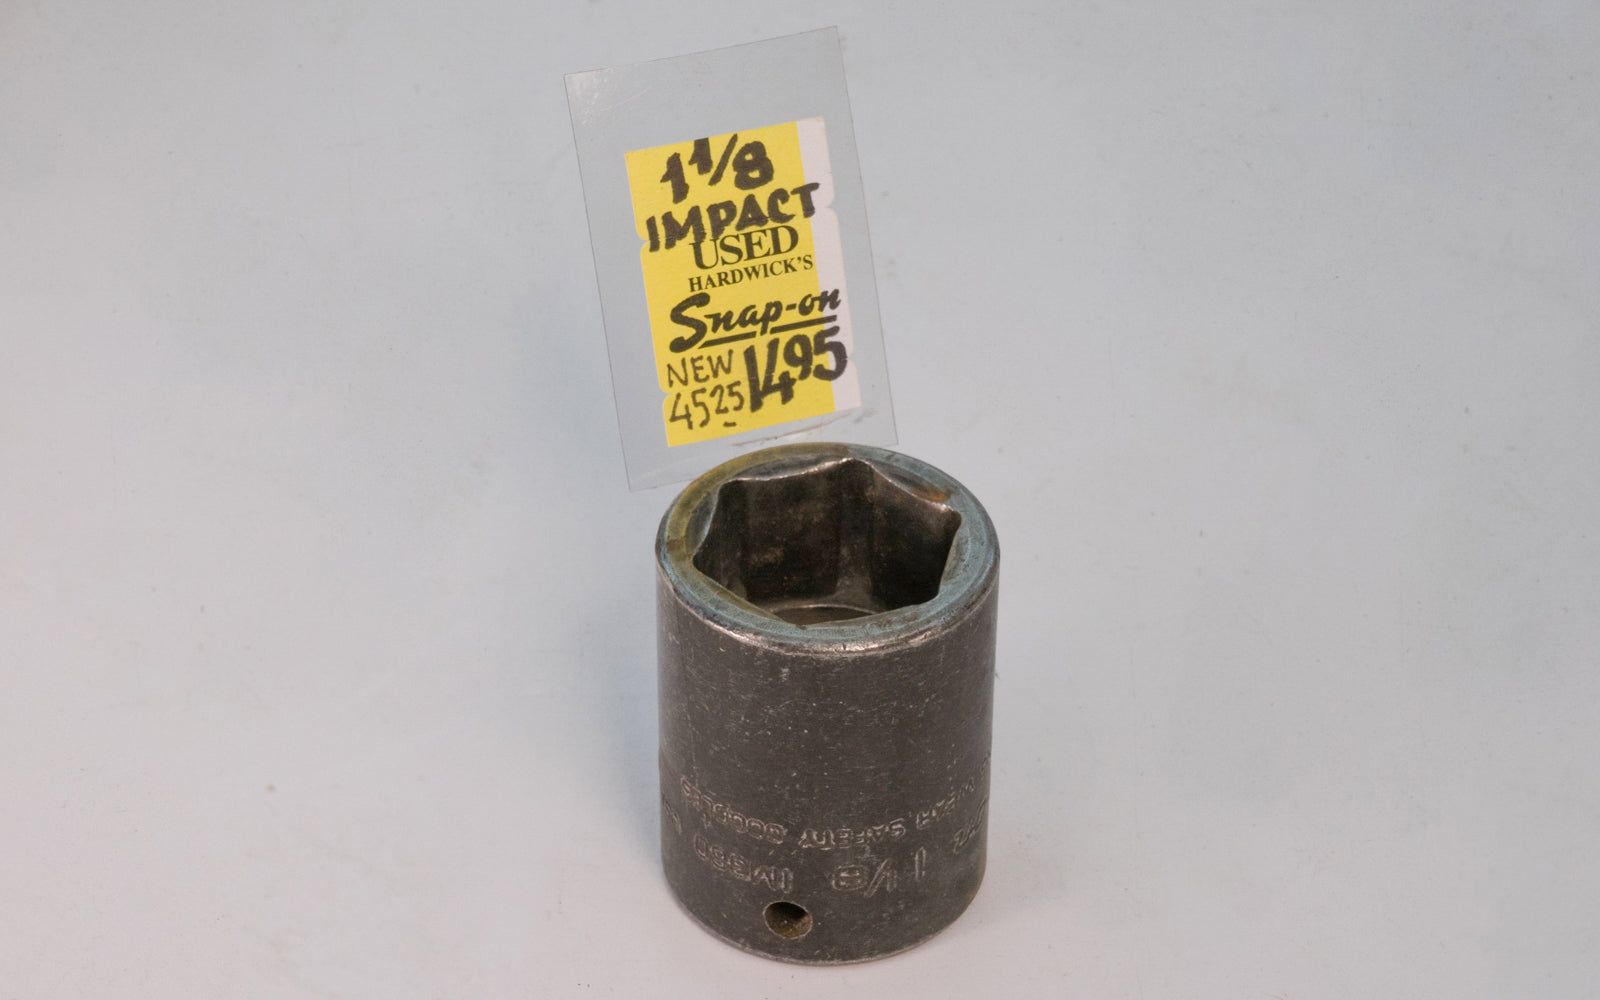 Snap-On 1-1/8" Impact Socket - USED. 1/2" Drive. Snap-On Model IM360. Made in USA.